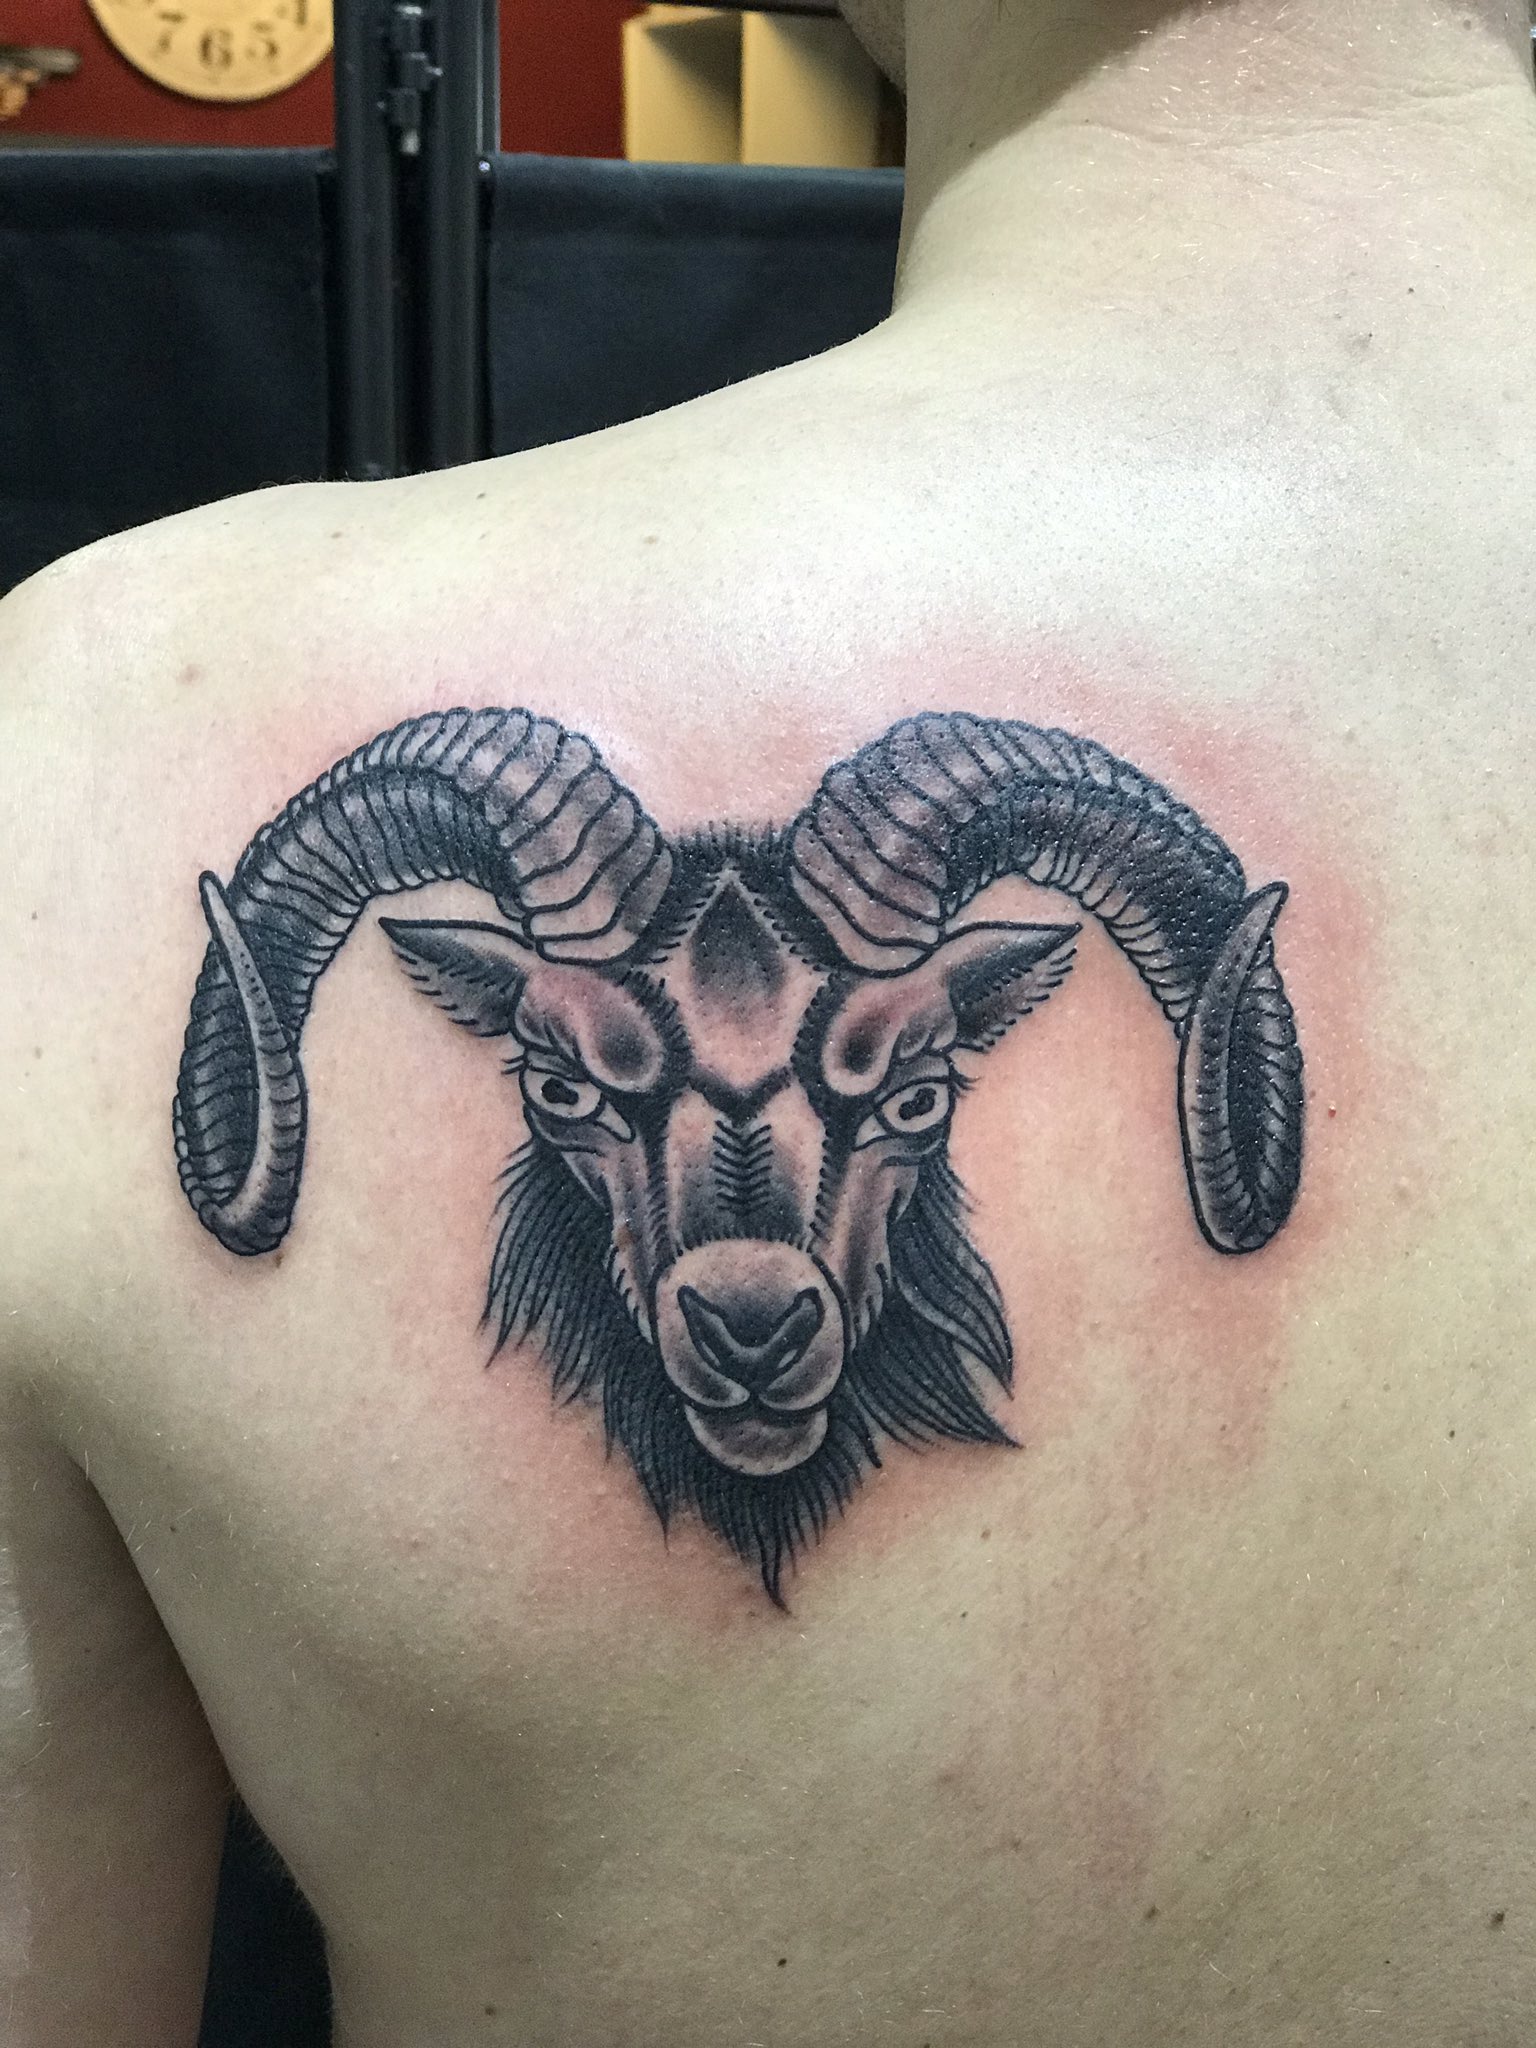 60 Silhouette Of Aries Ram Tattoo Designs Stock Photos Pictures   RoyaltyFree Images  iStock